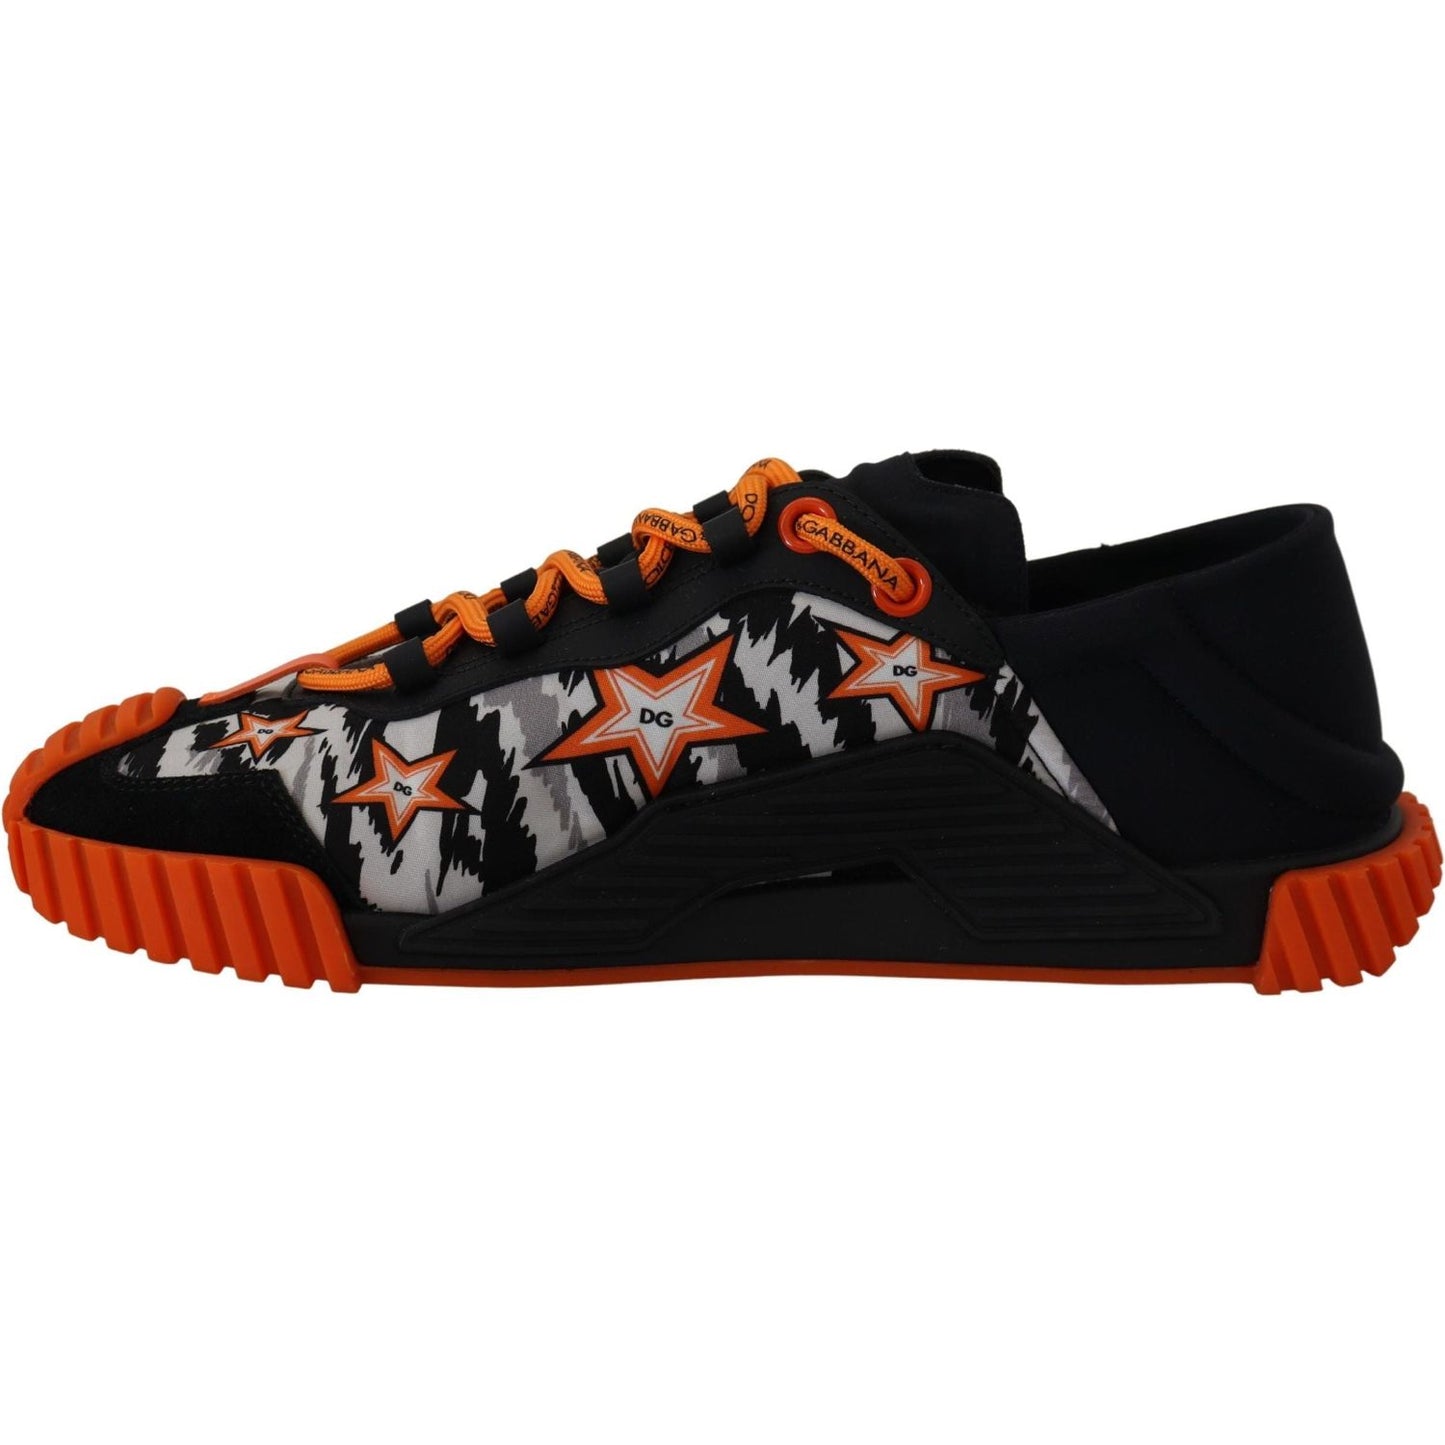 Dolce & Gabbana Elevate Your Step with Luxe Black NS1 Sneakers black-orange-fabric-lace-up-sneakers-ns1-shoes